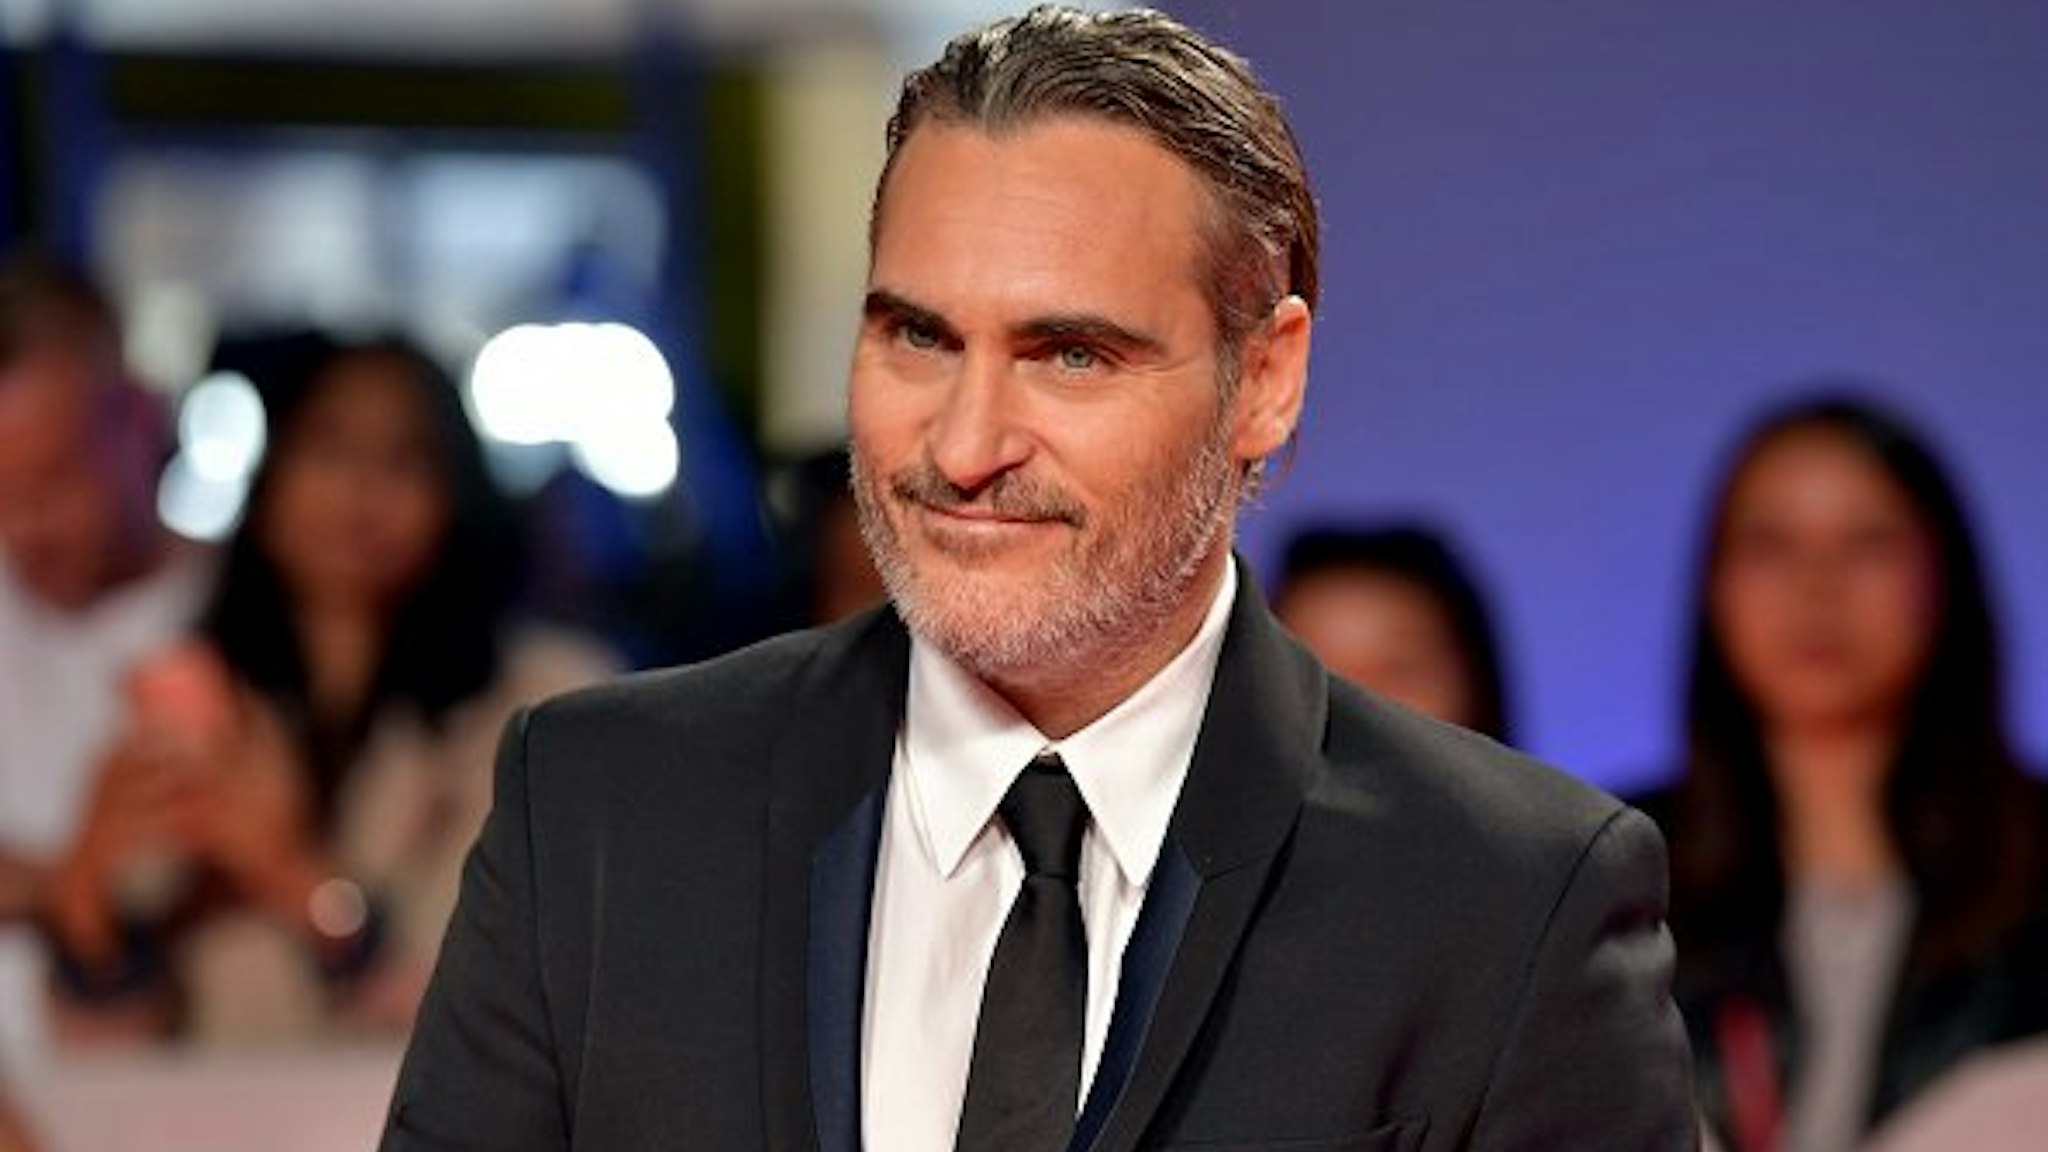 Joaquin Phoenix attends the "Joker" premiere during the 2019 Toronto International Film Festival at Roy Thomson Hall on September 09, 2019 in Toronto, Canada.